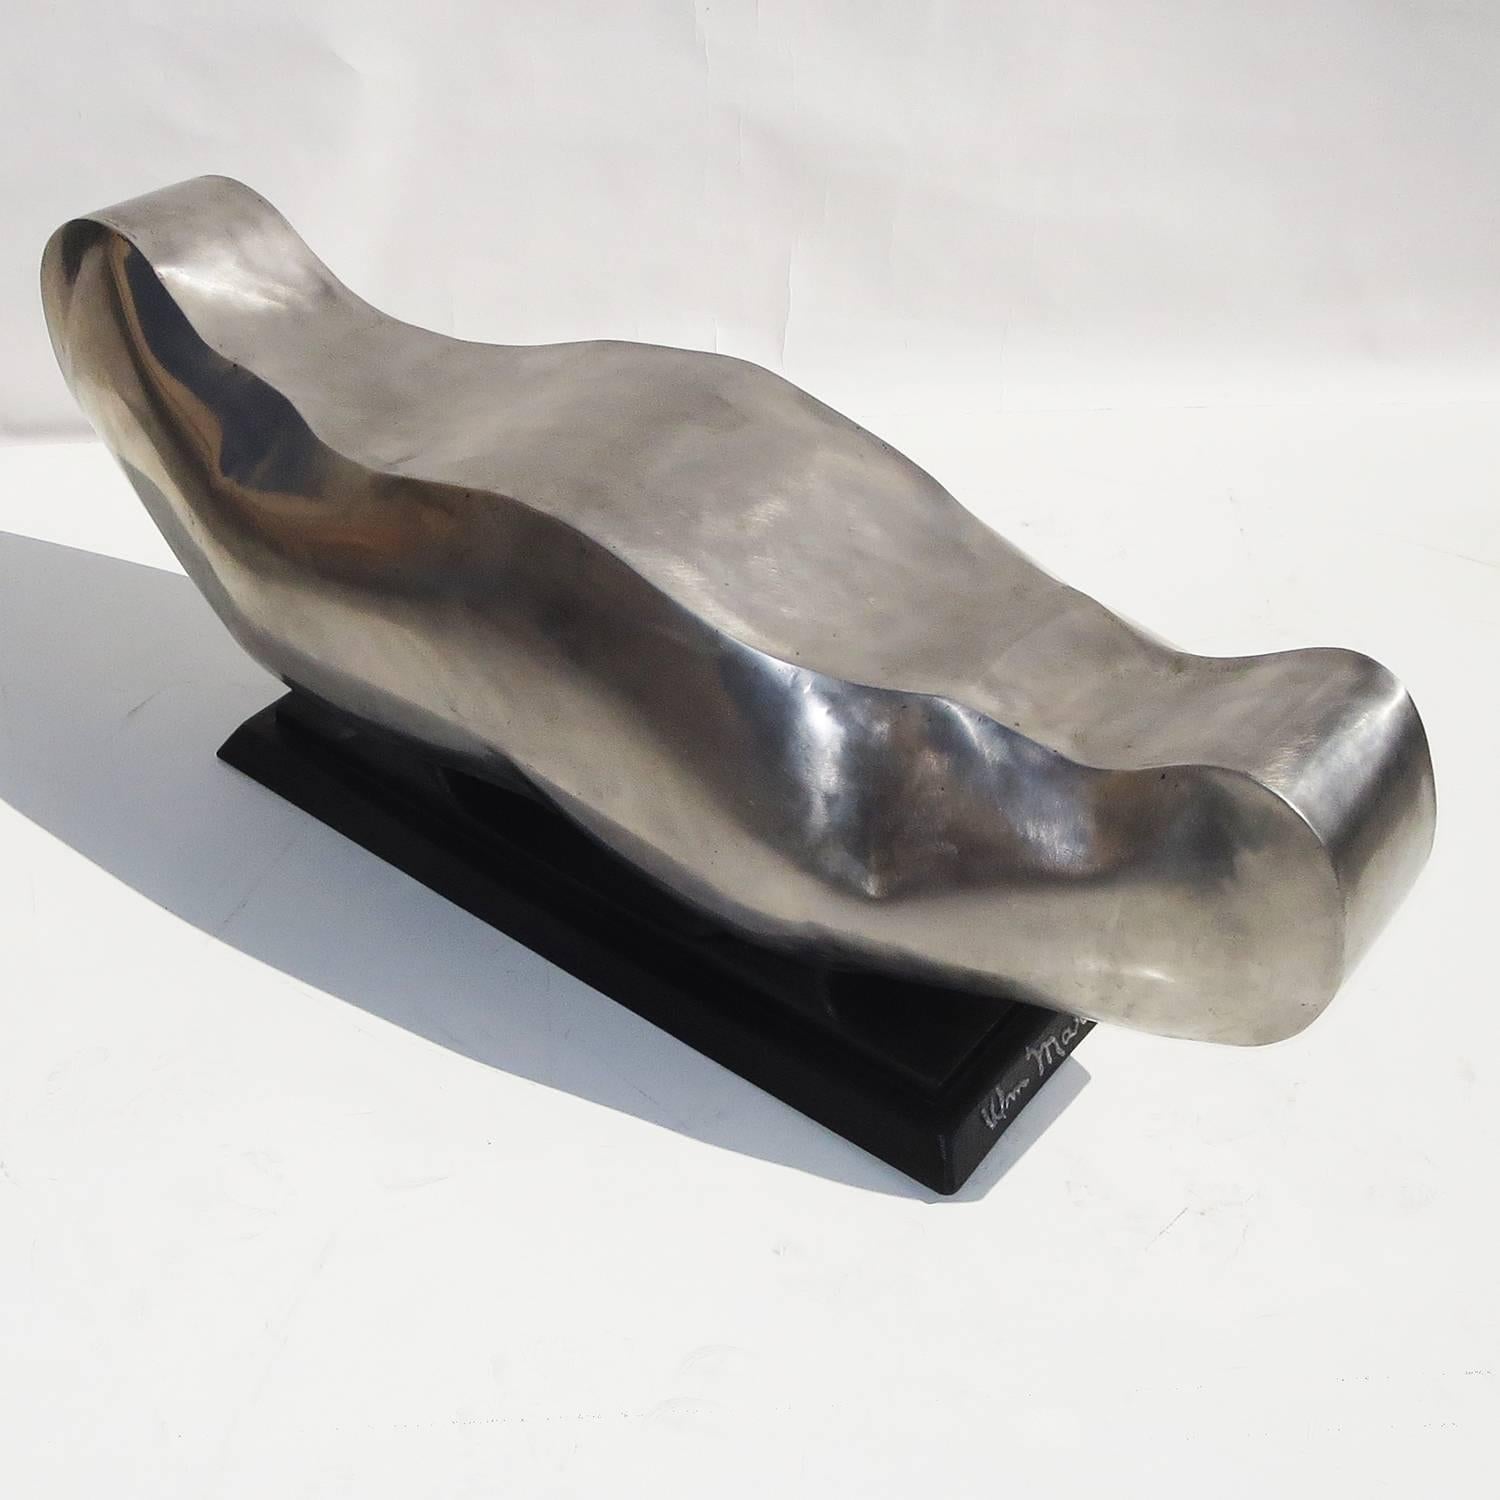 A dynamic form by California sculptor / artist William Martin. The form is hollow steel panels, welded, polished and clear lacquered. The base is black painted steel, with a raised signature. The inside is also weld signed Bill Martin 75. The